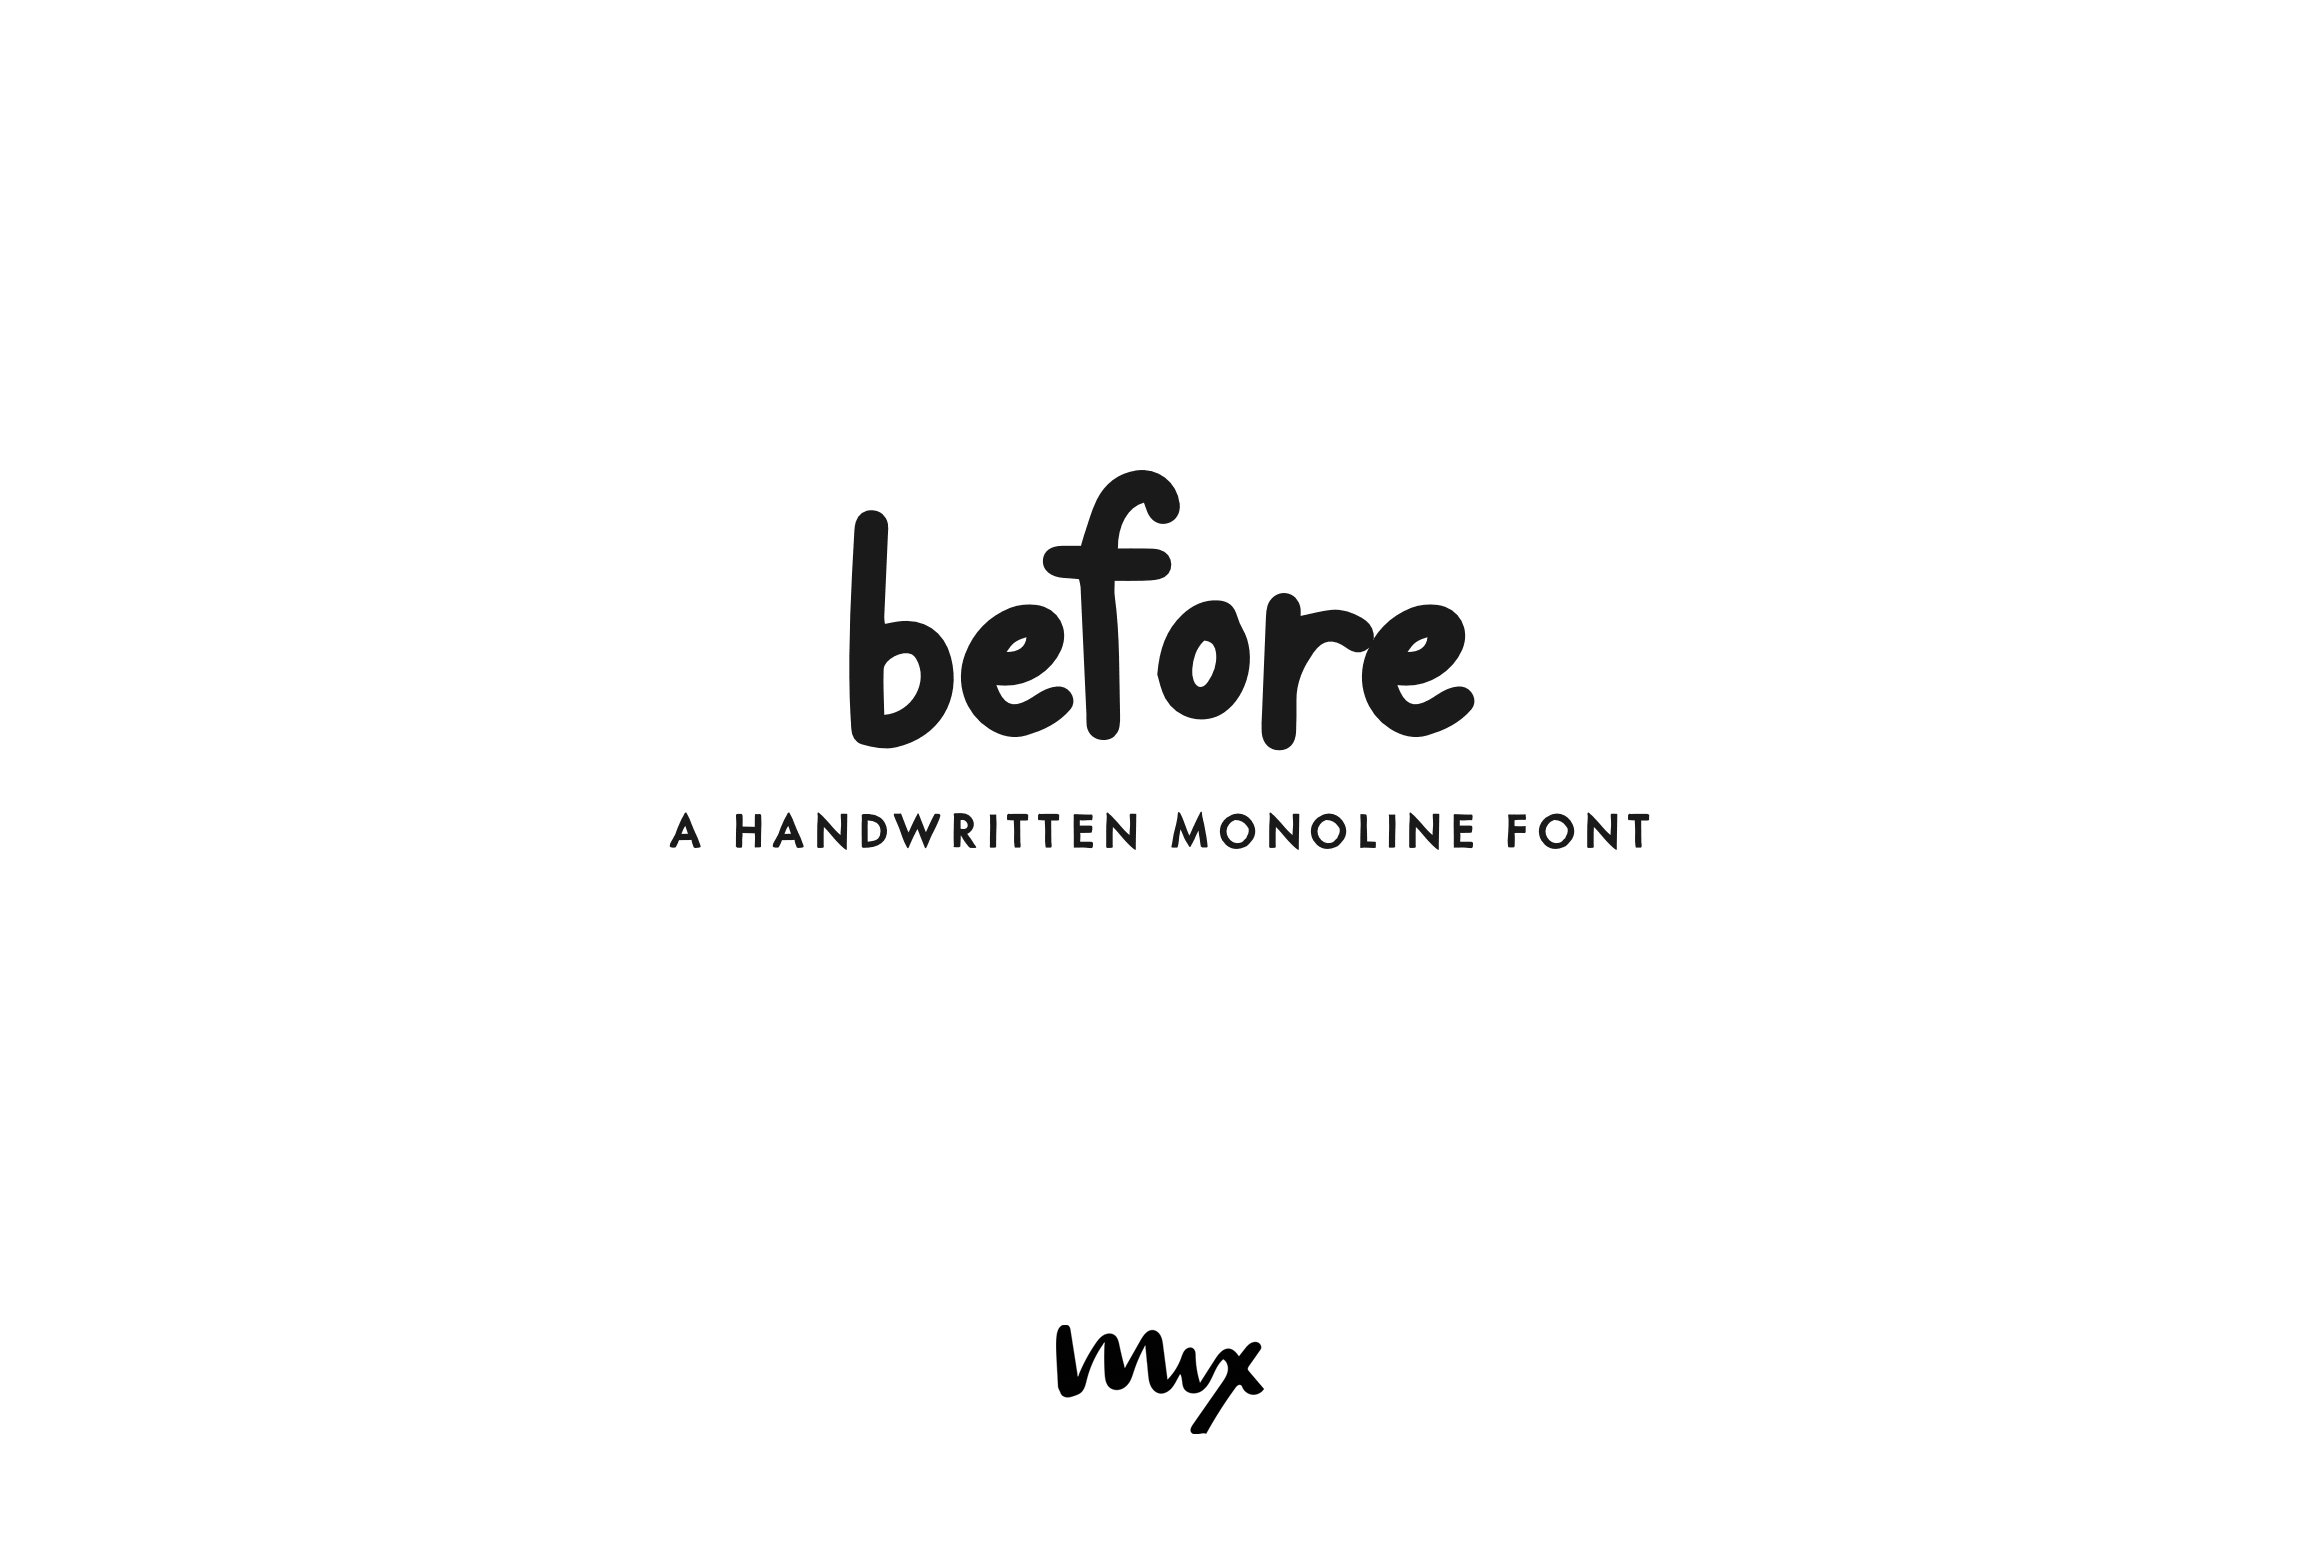 Before — A Handwritten Monoline Font cover image.